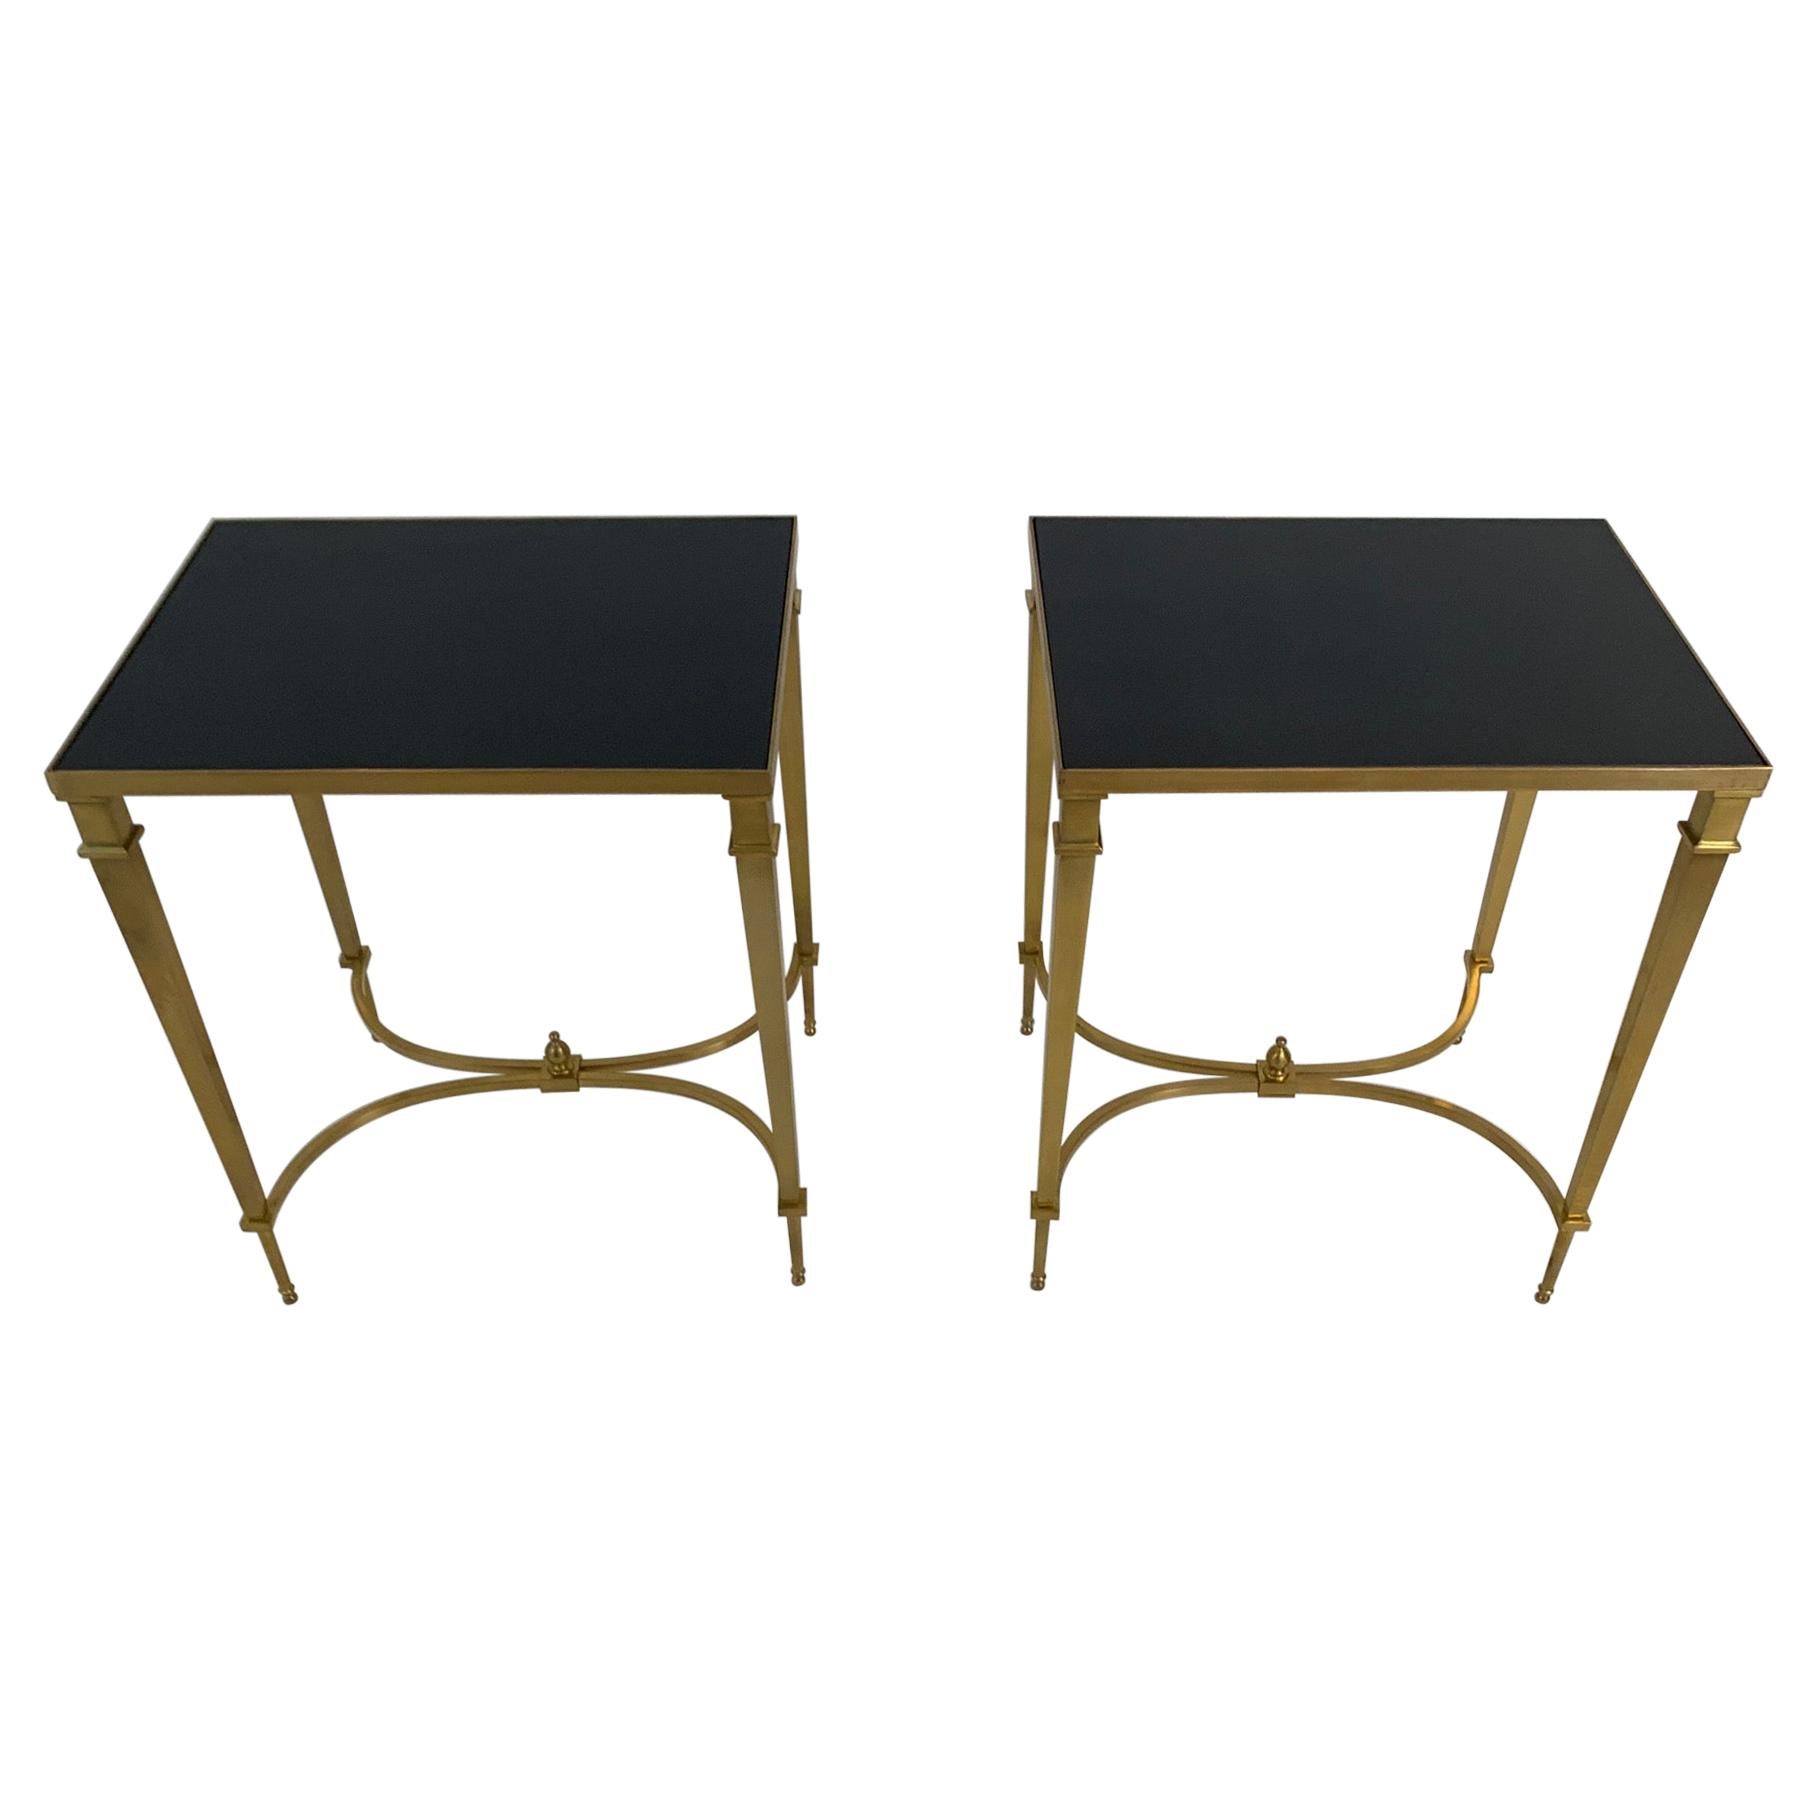 Maison Jansen Style Pair of Sophisticated Brass & Black Granite End Tables